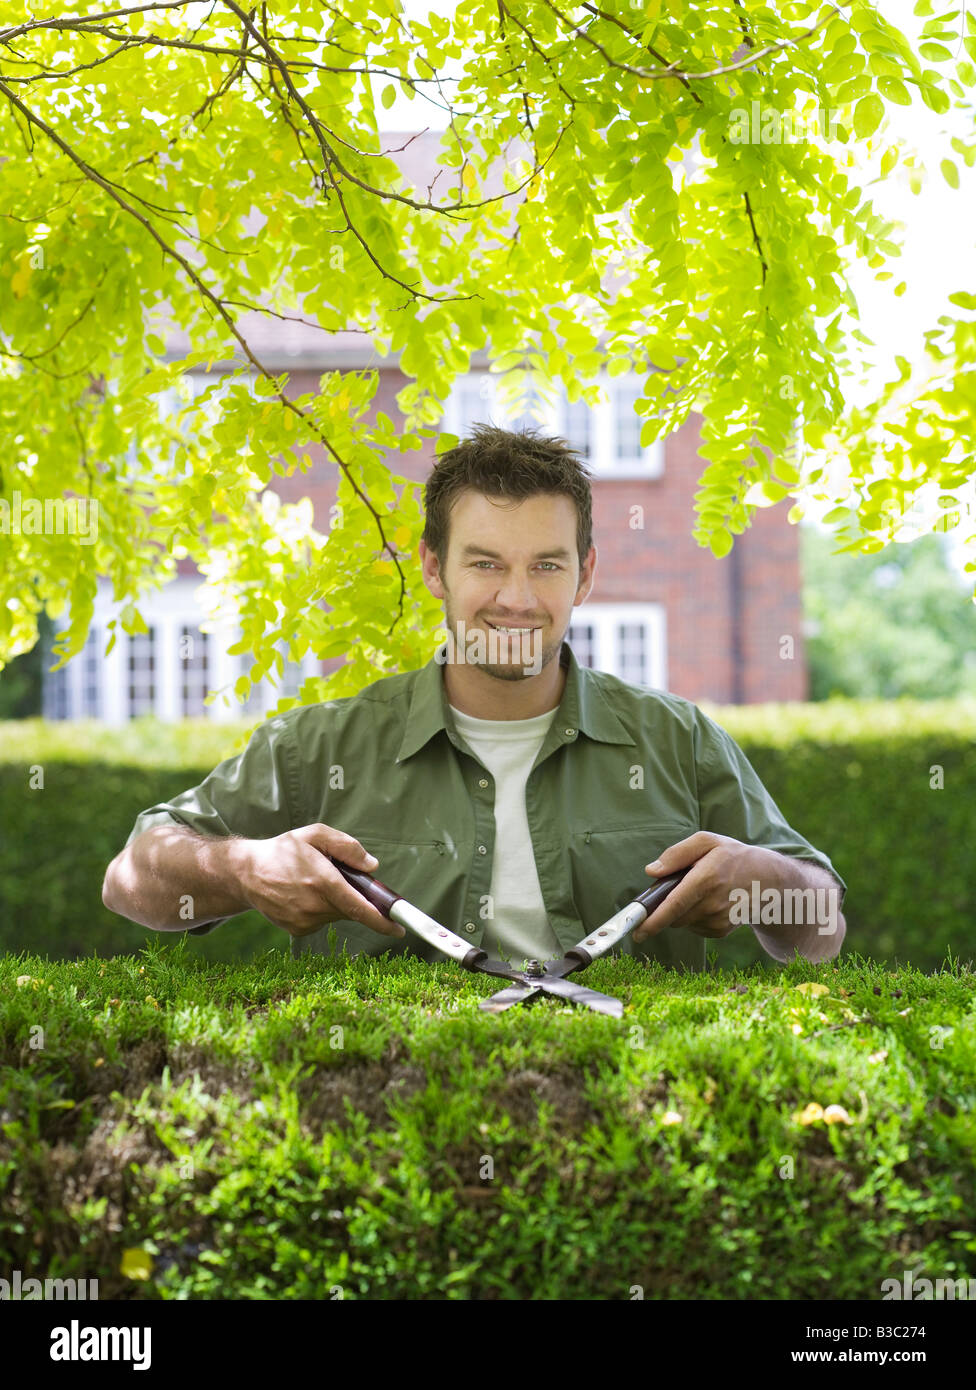 A man cutting a hedge with shears Stock Photo